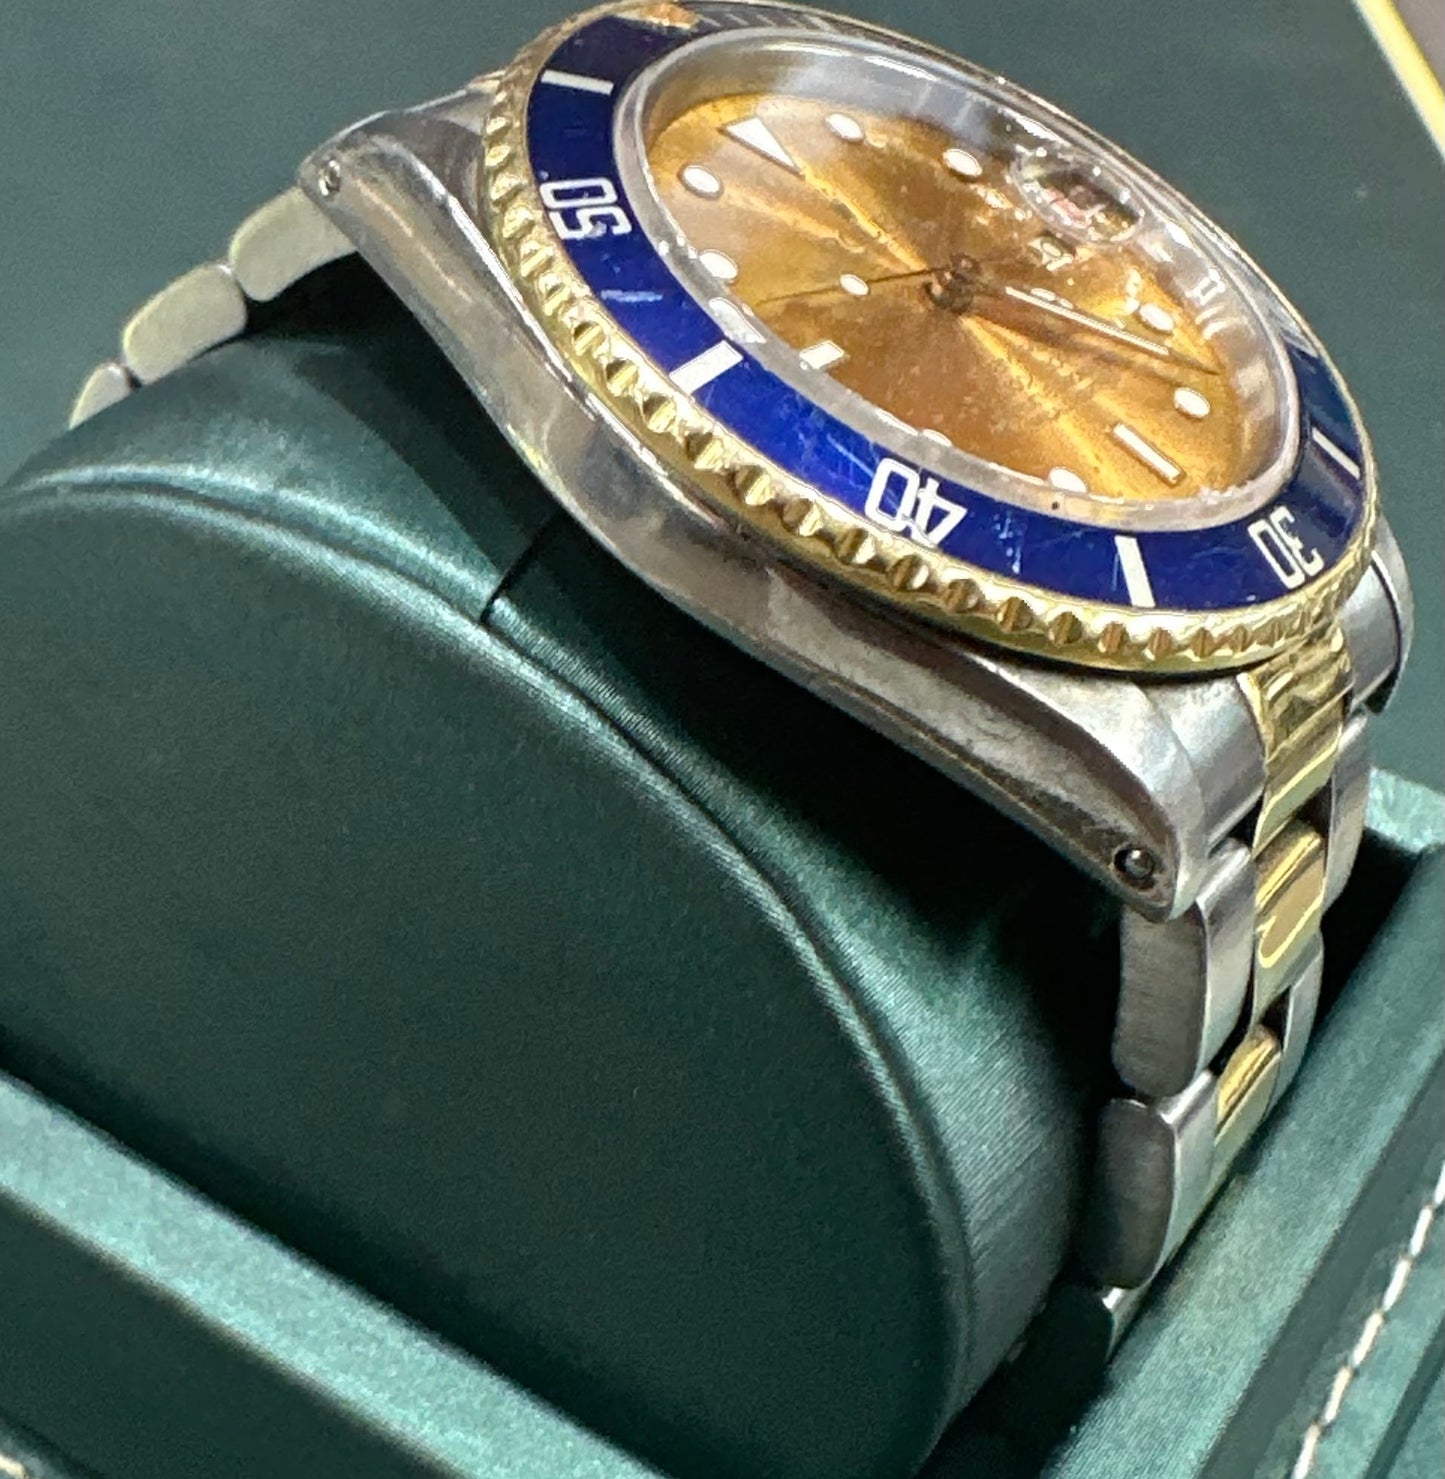 Rolex submariner gold dial edition